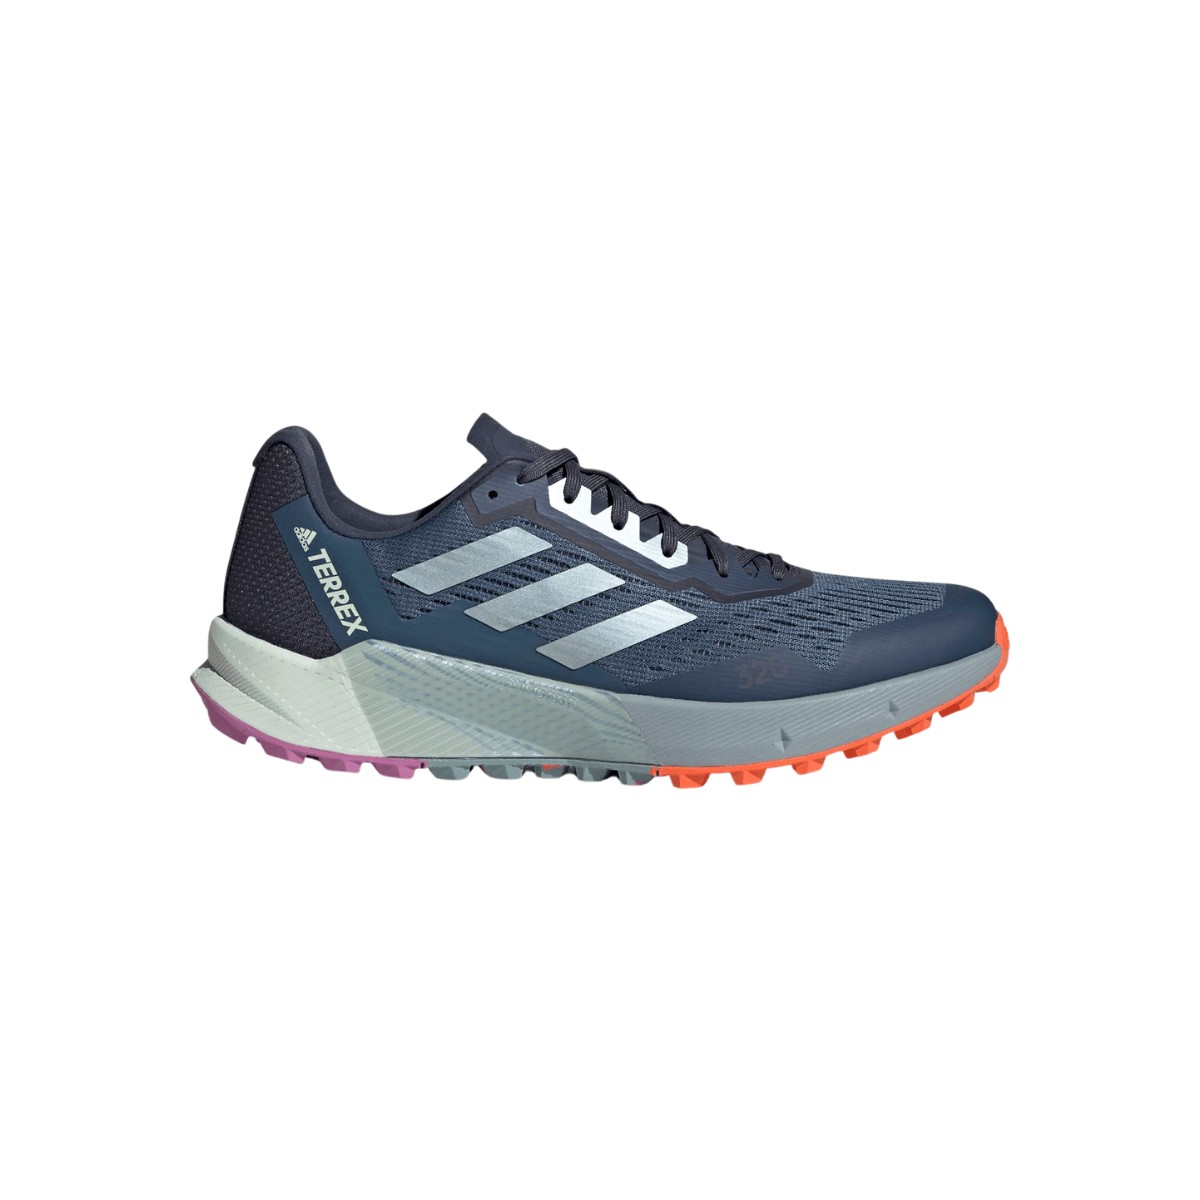 Adidas Terrex Agravic Flow 2 Blue Gray Running Shoes AW22, Size UK 8